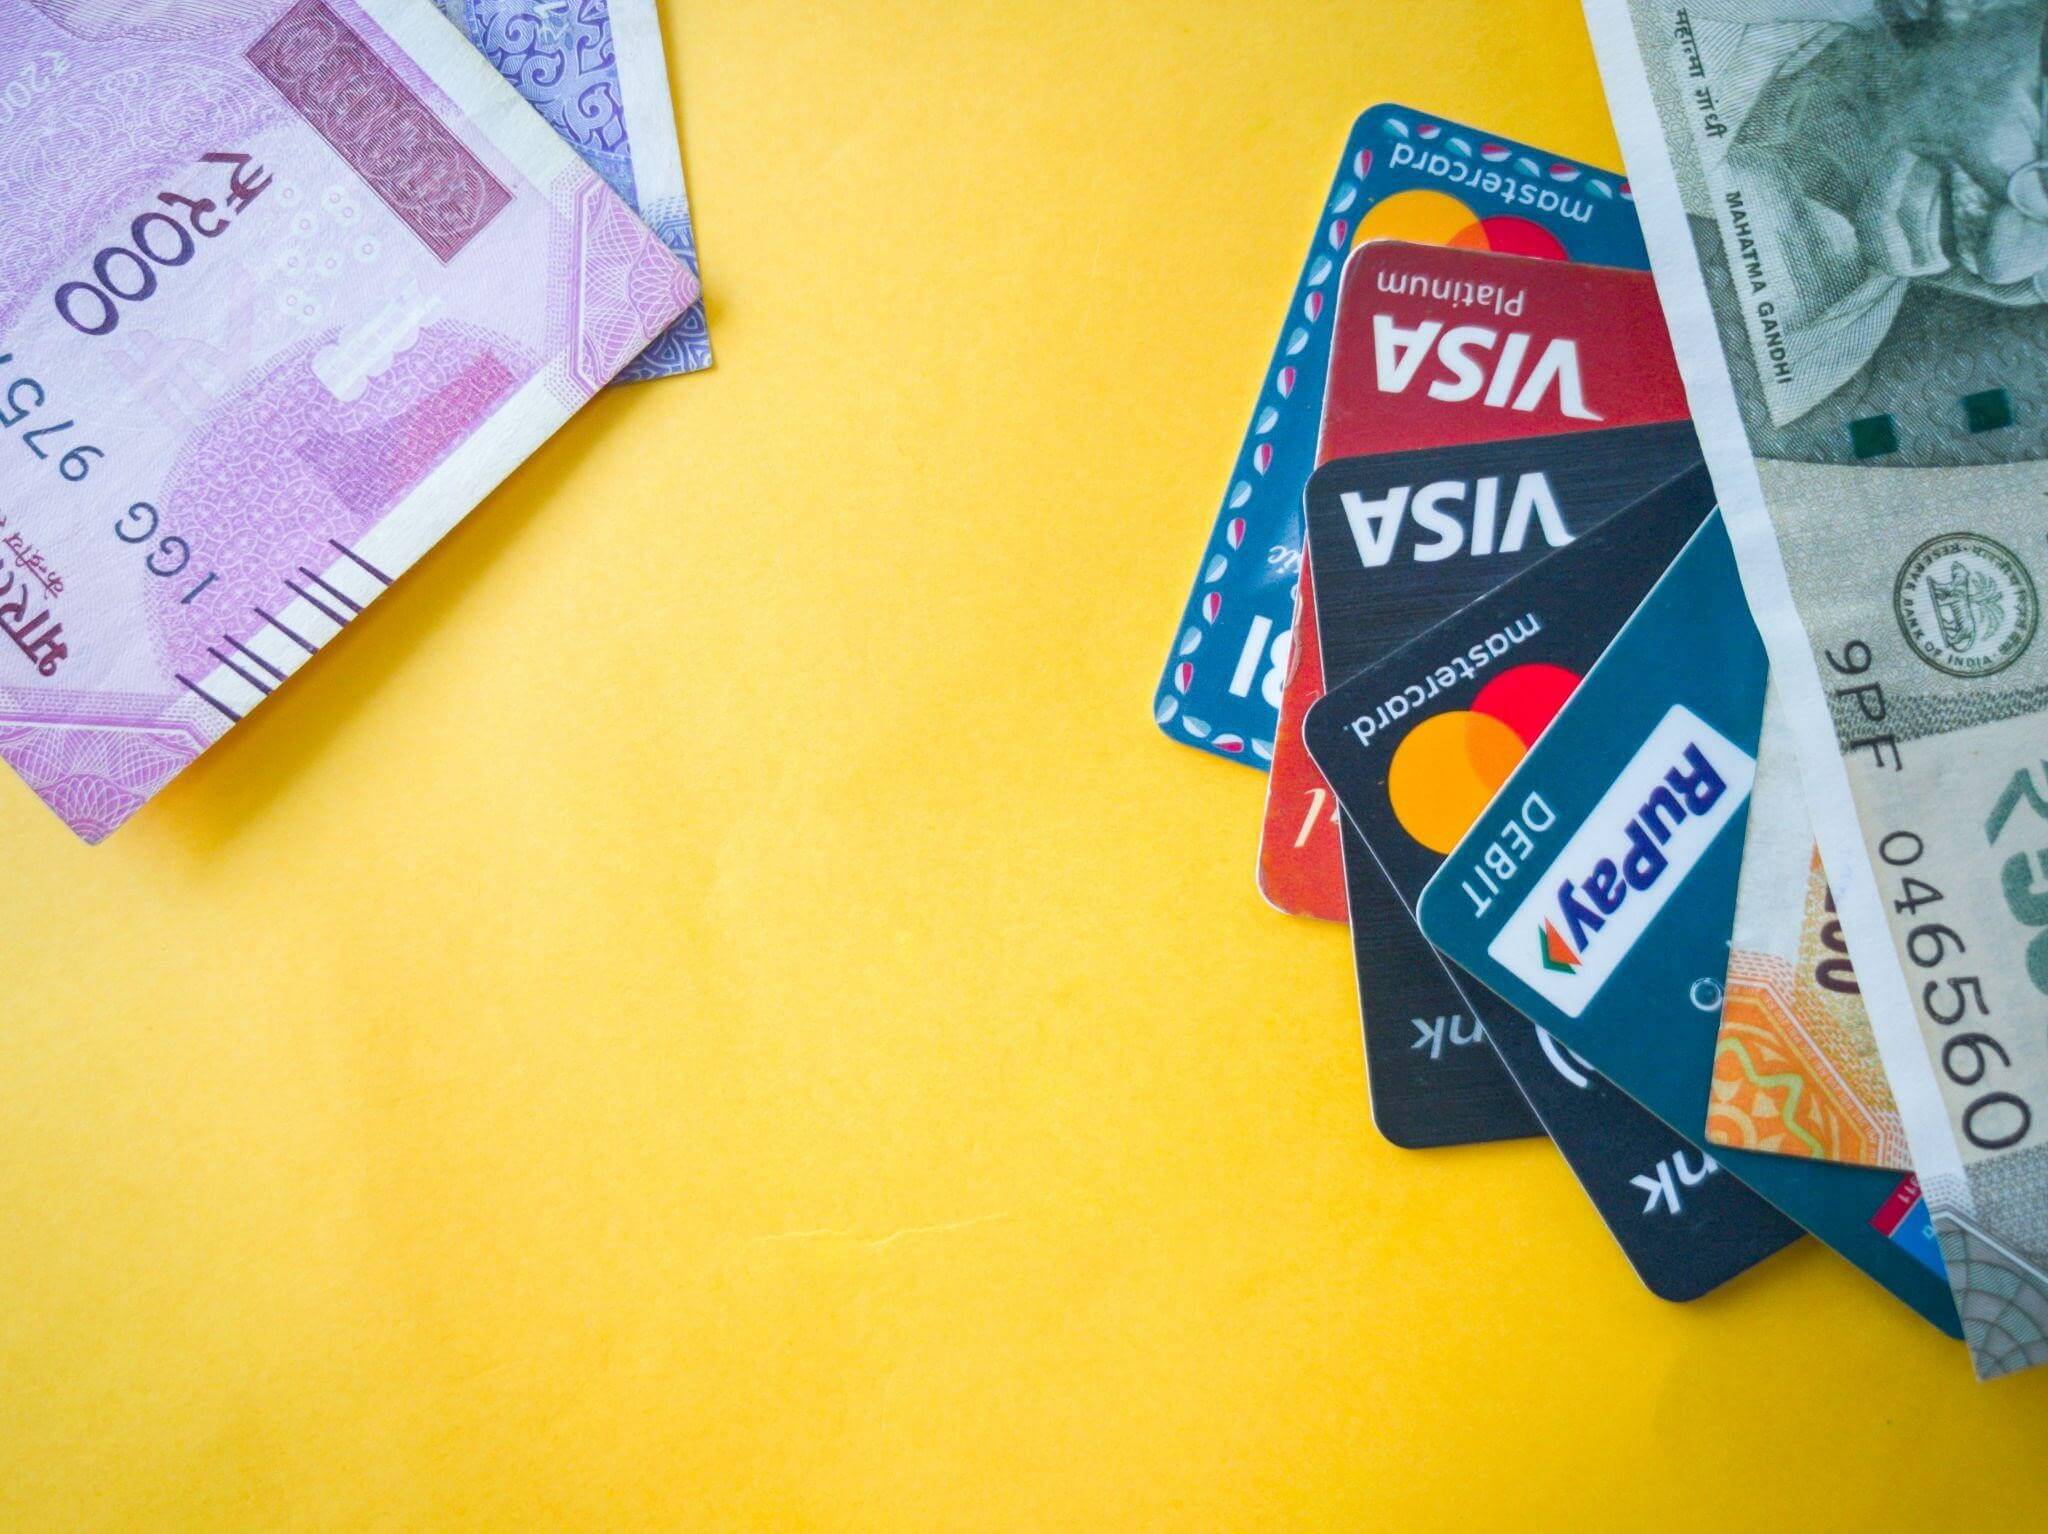 5 Types of Debit Cards And Their Features That You Should Know